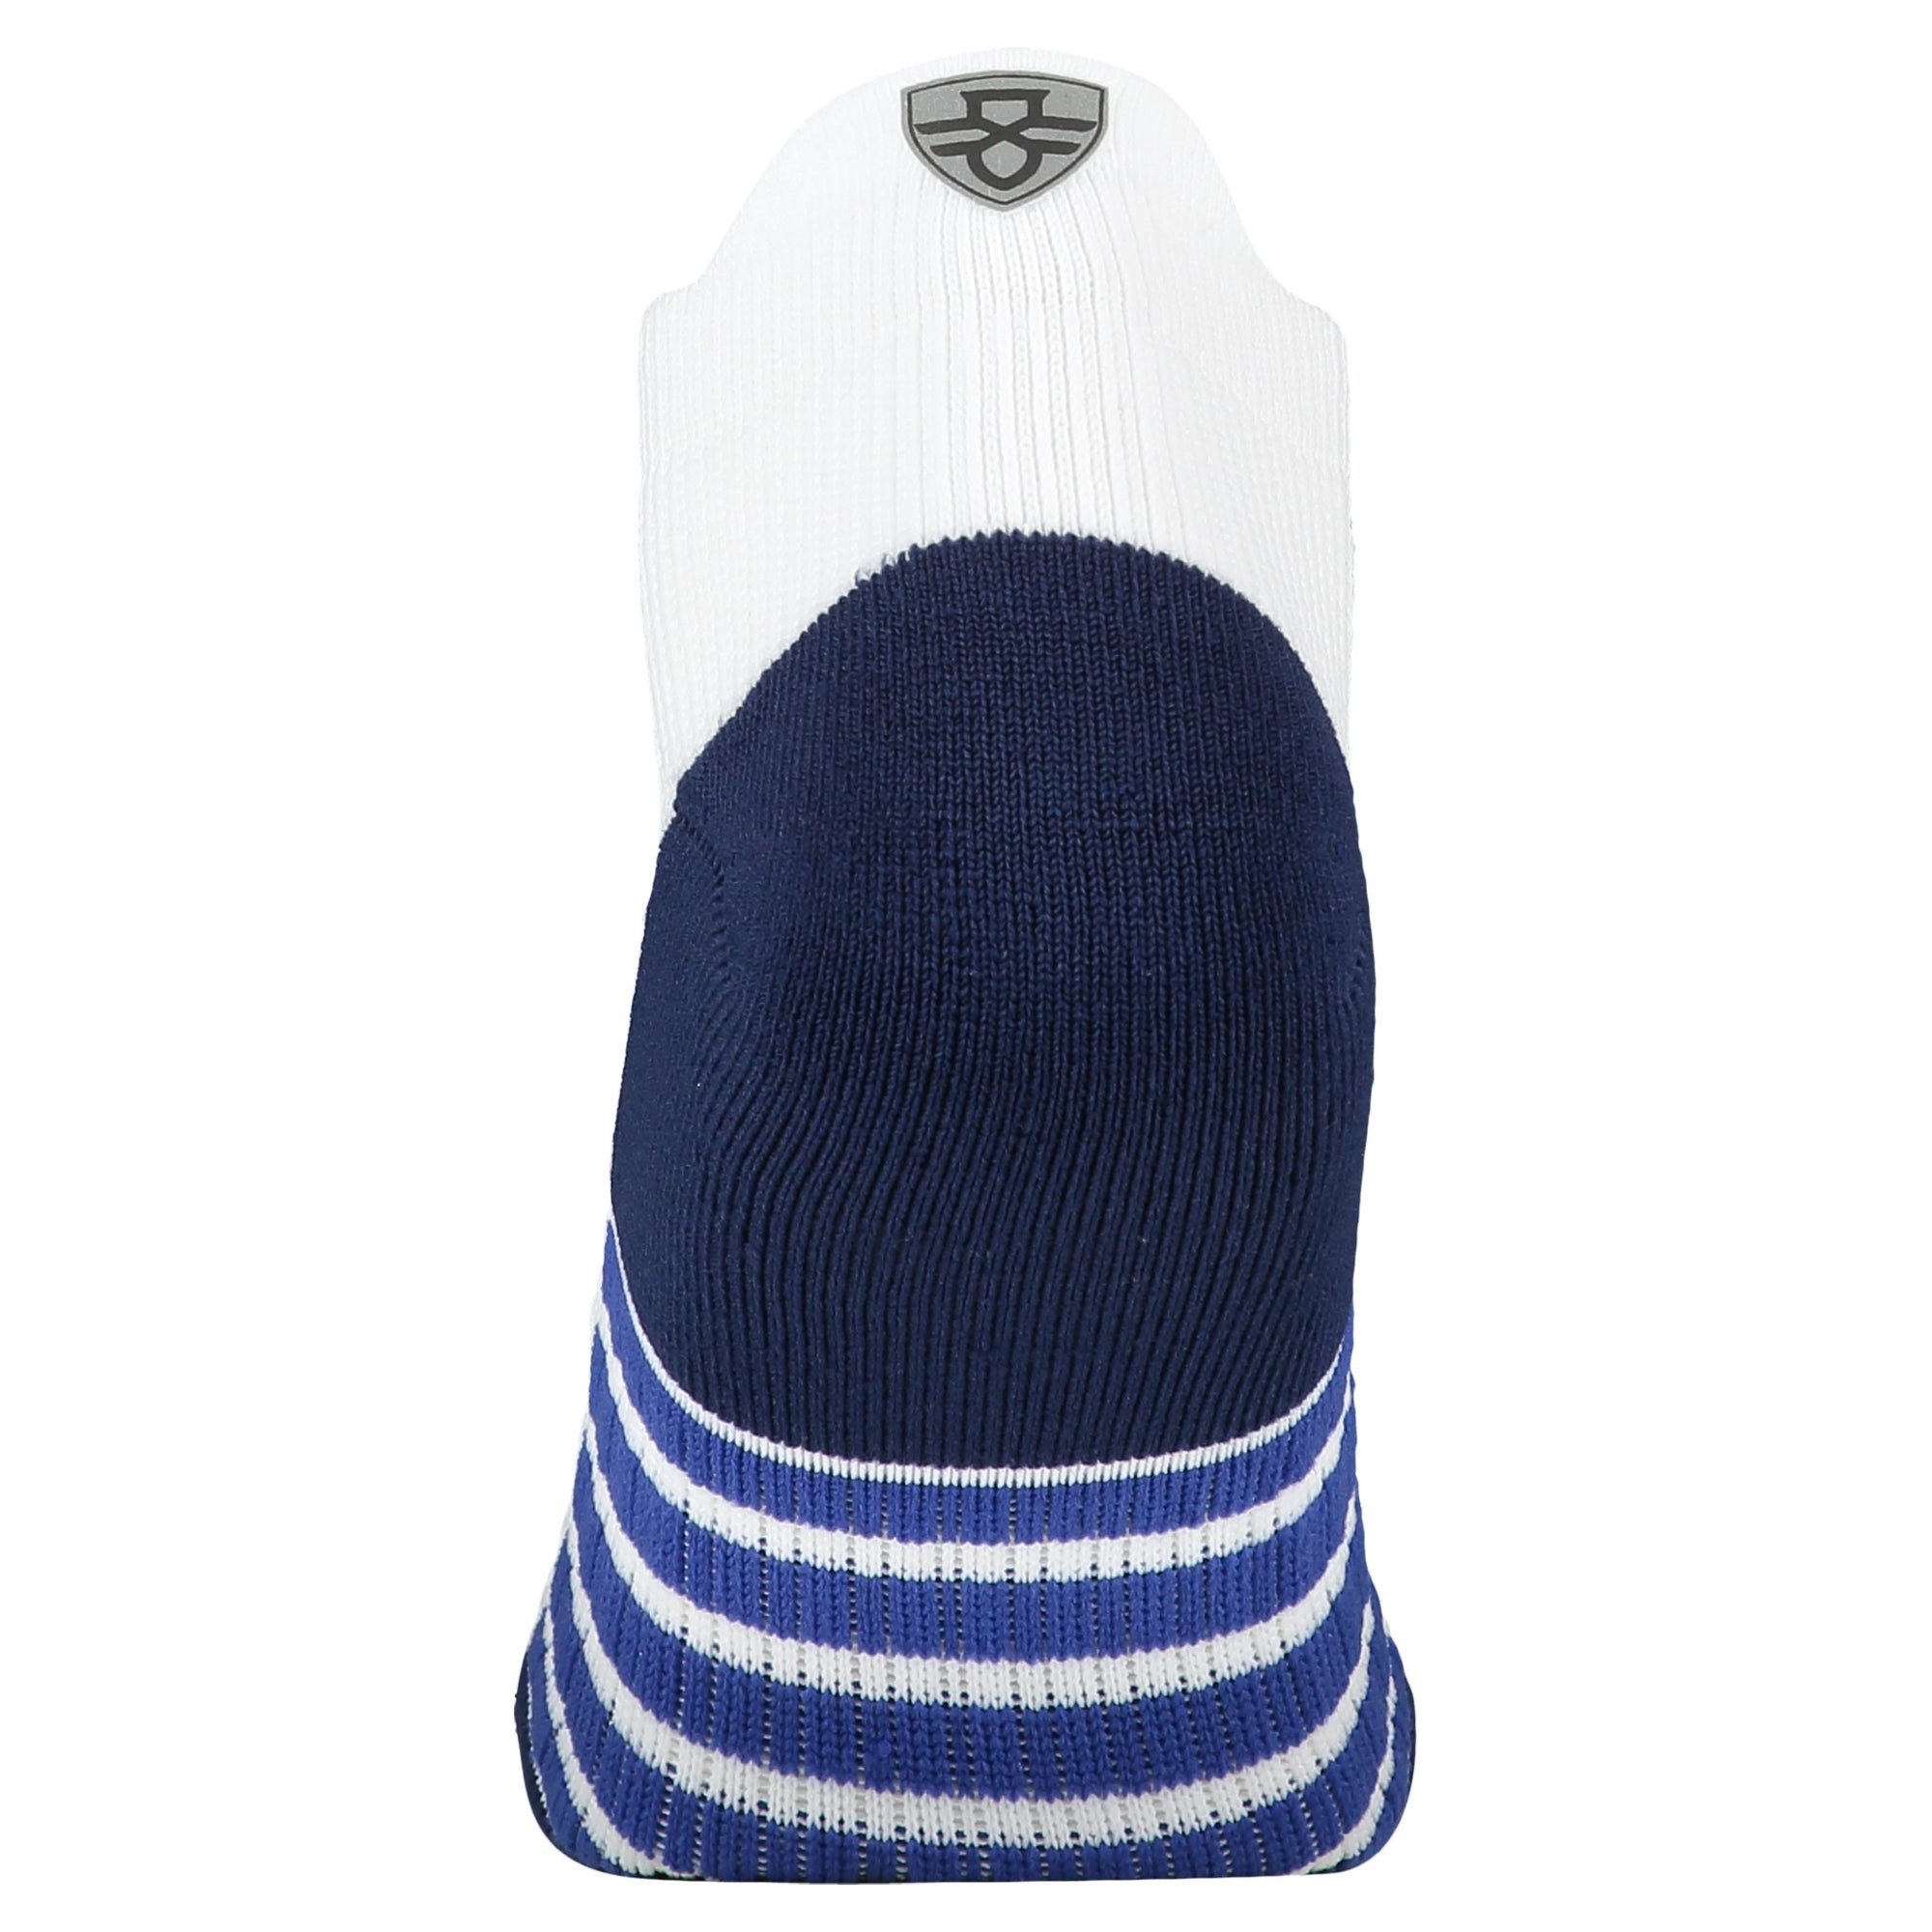 Crossfly men's Vent Low Socks in white / navy from the Performance series, featuring AirVent and AirBeams.